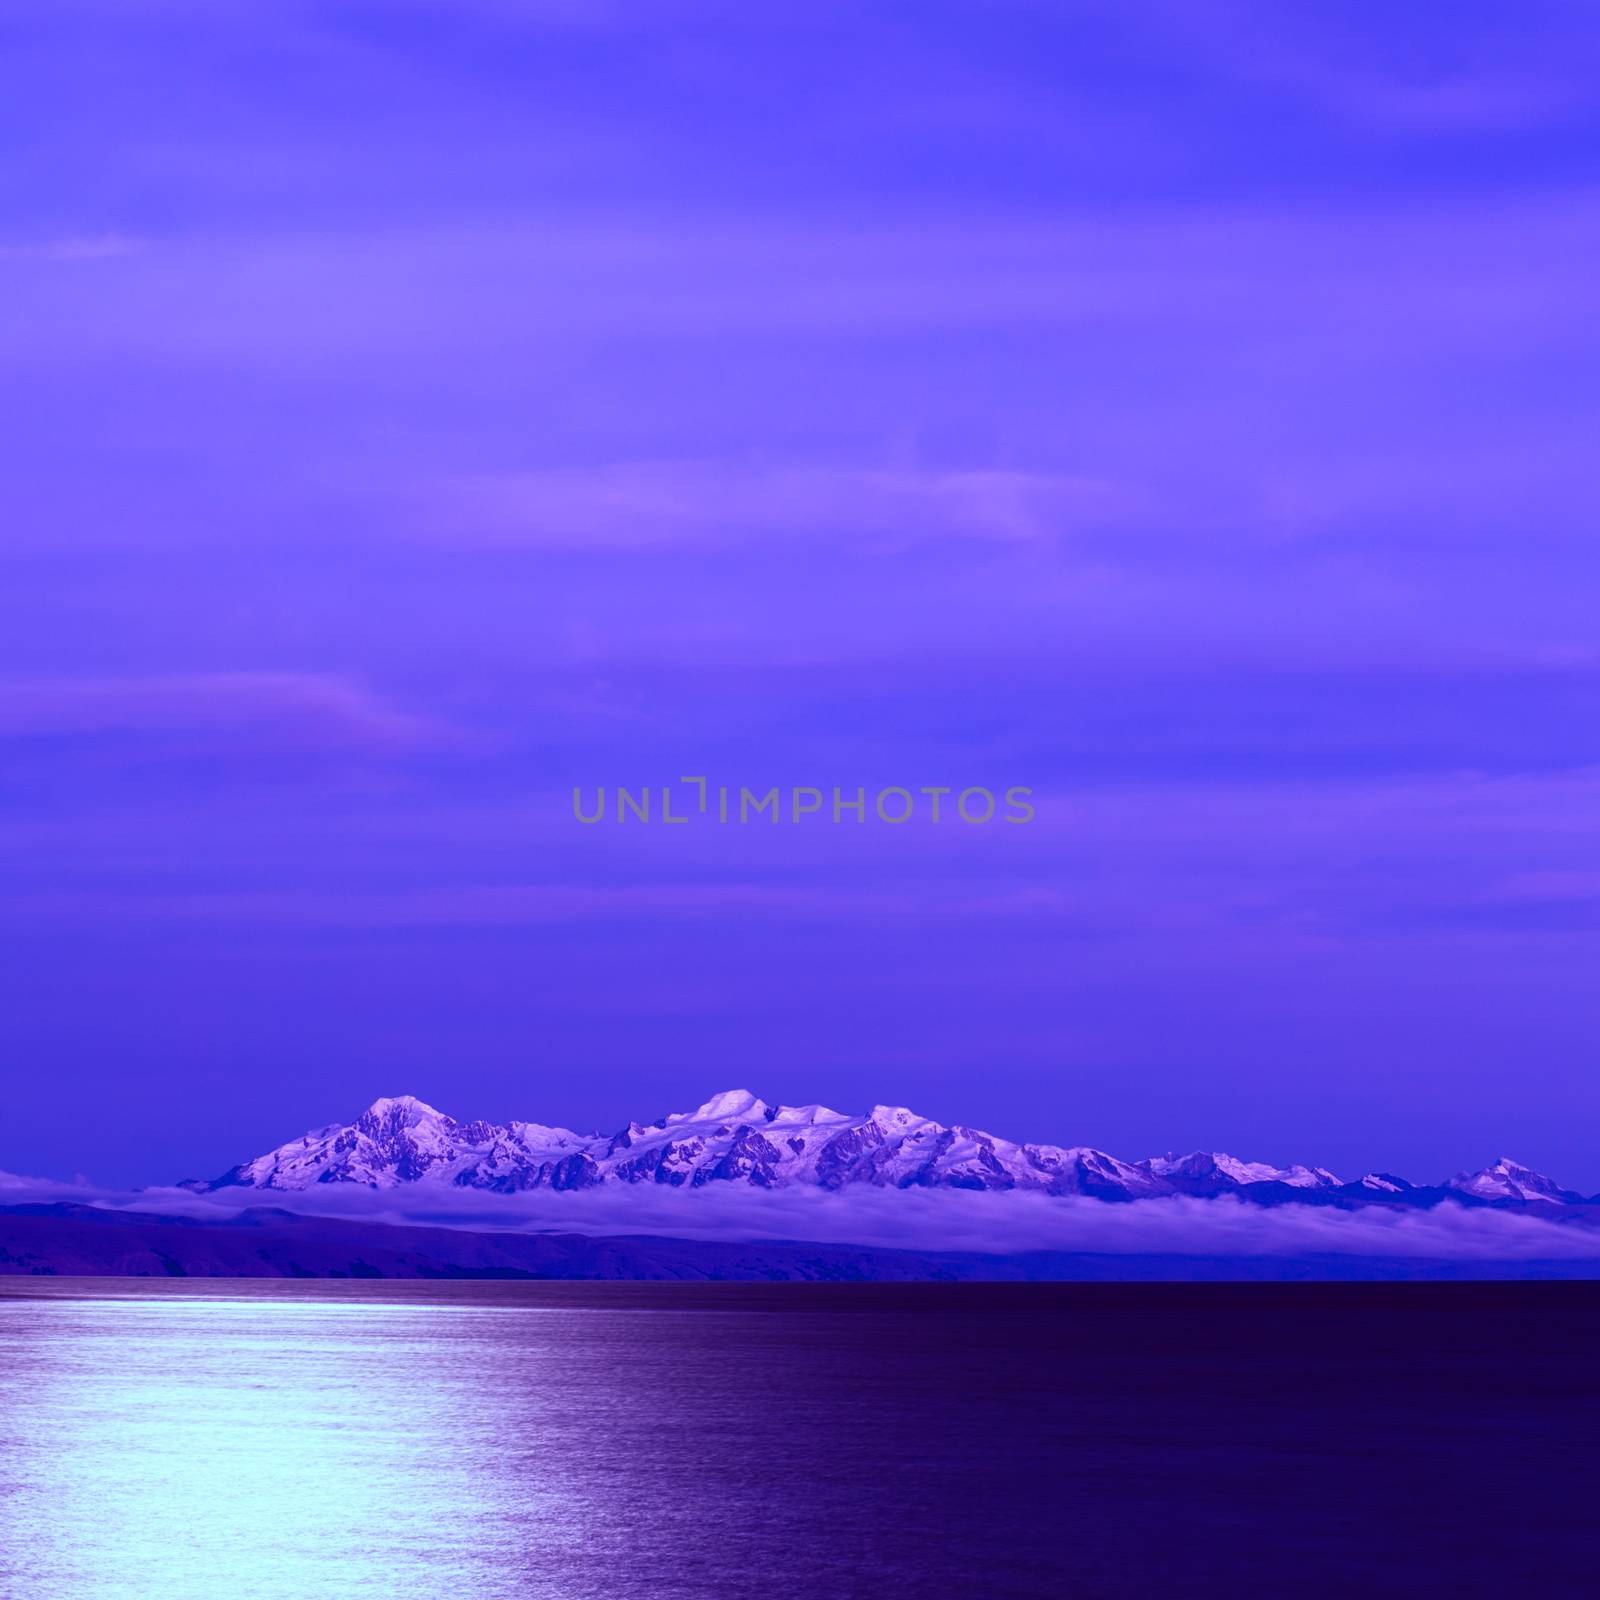 Lake Titicaca and the Andes at Full Moon by ildi